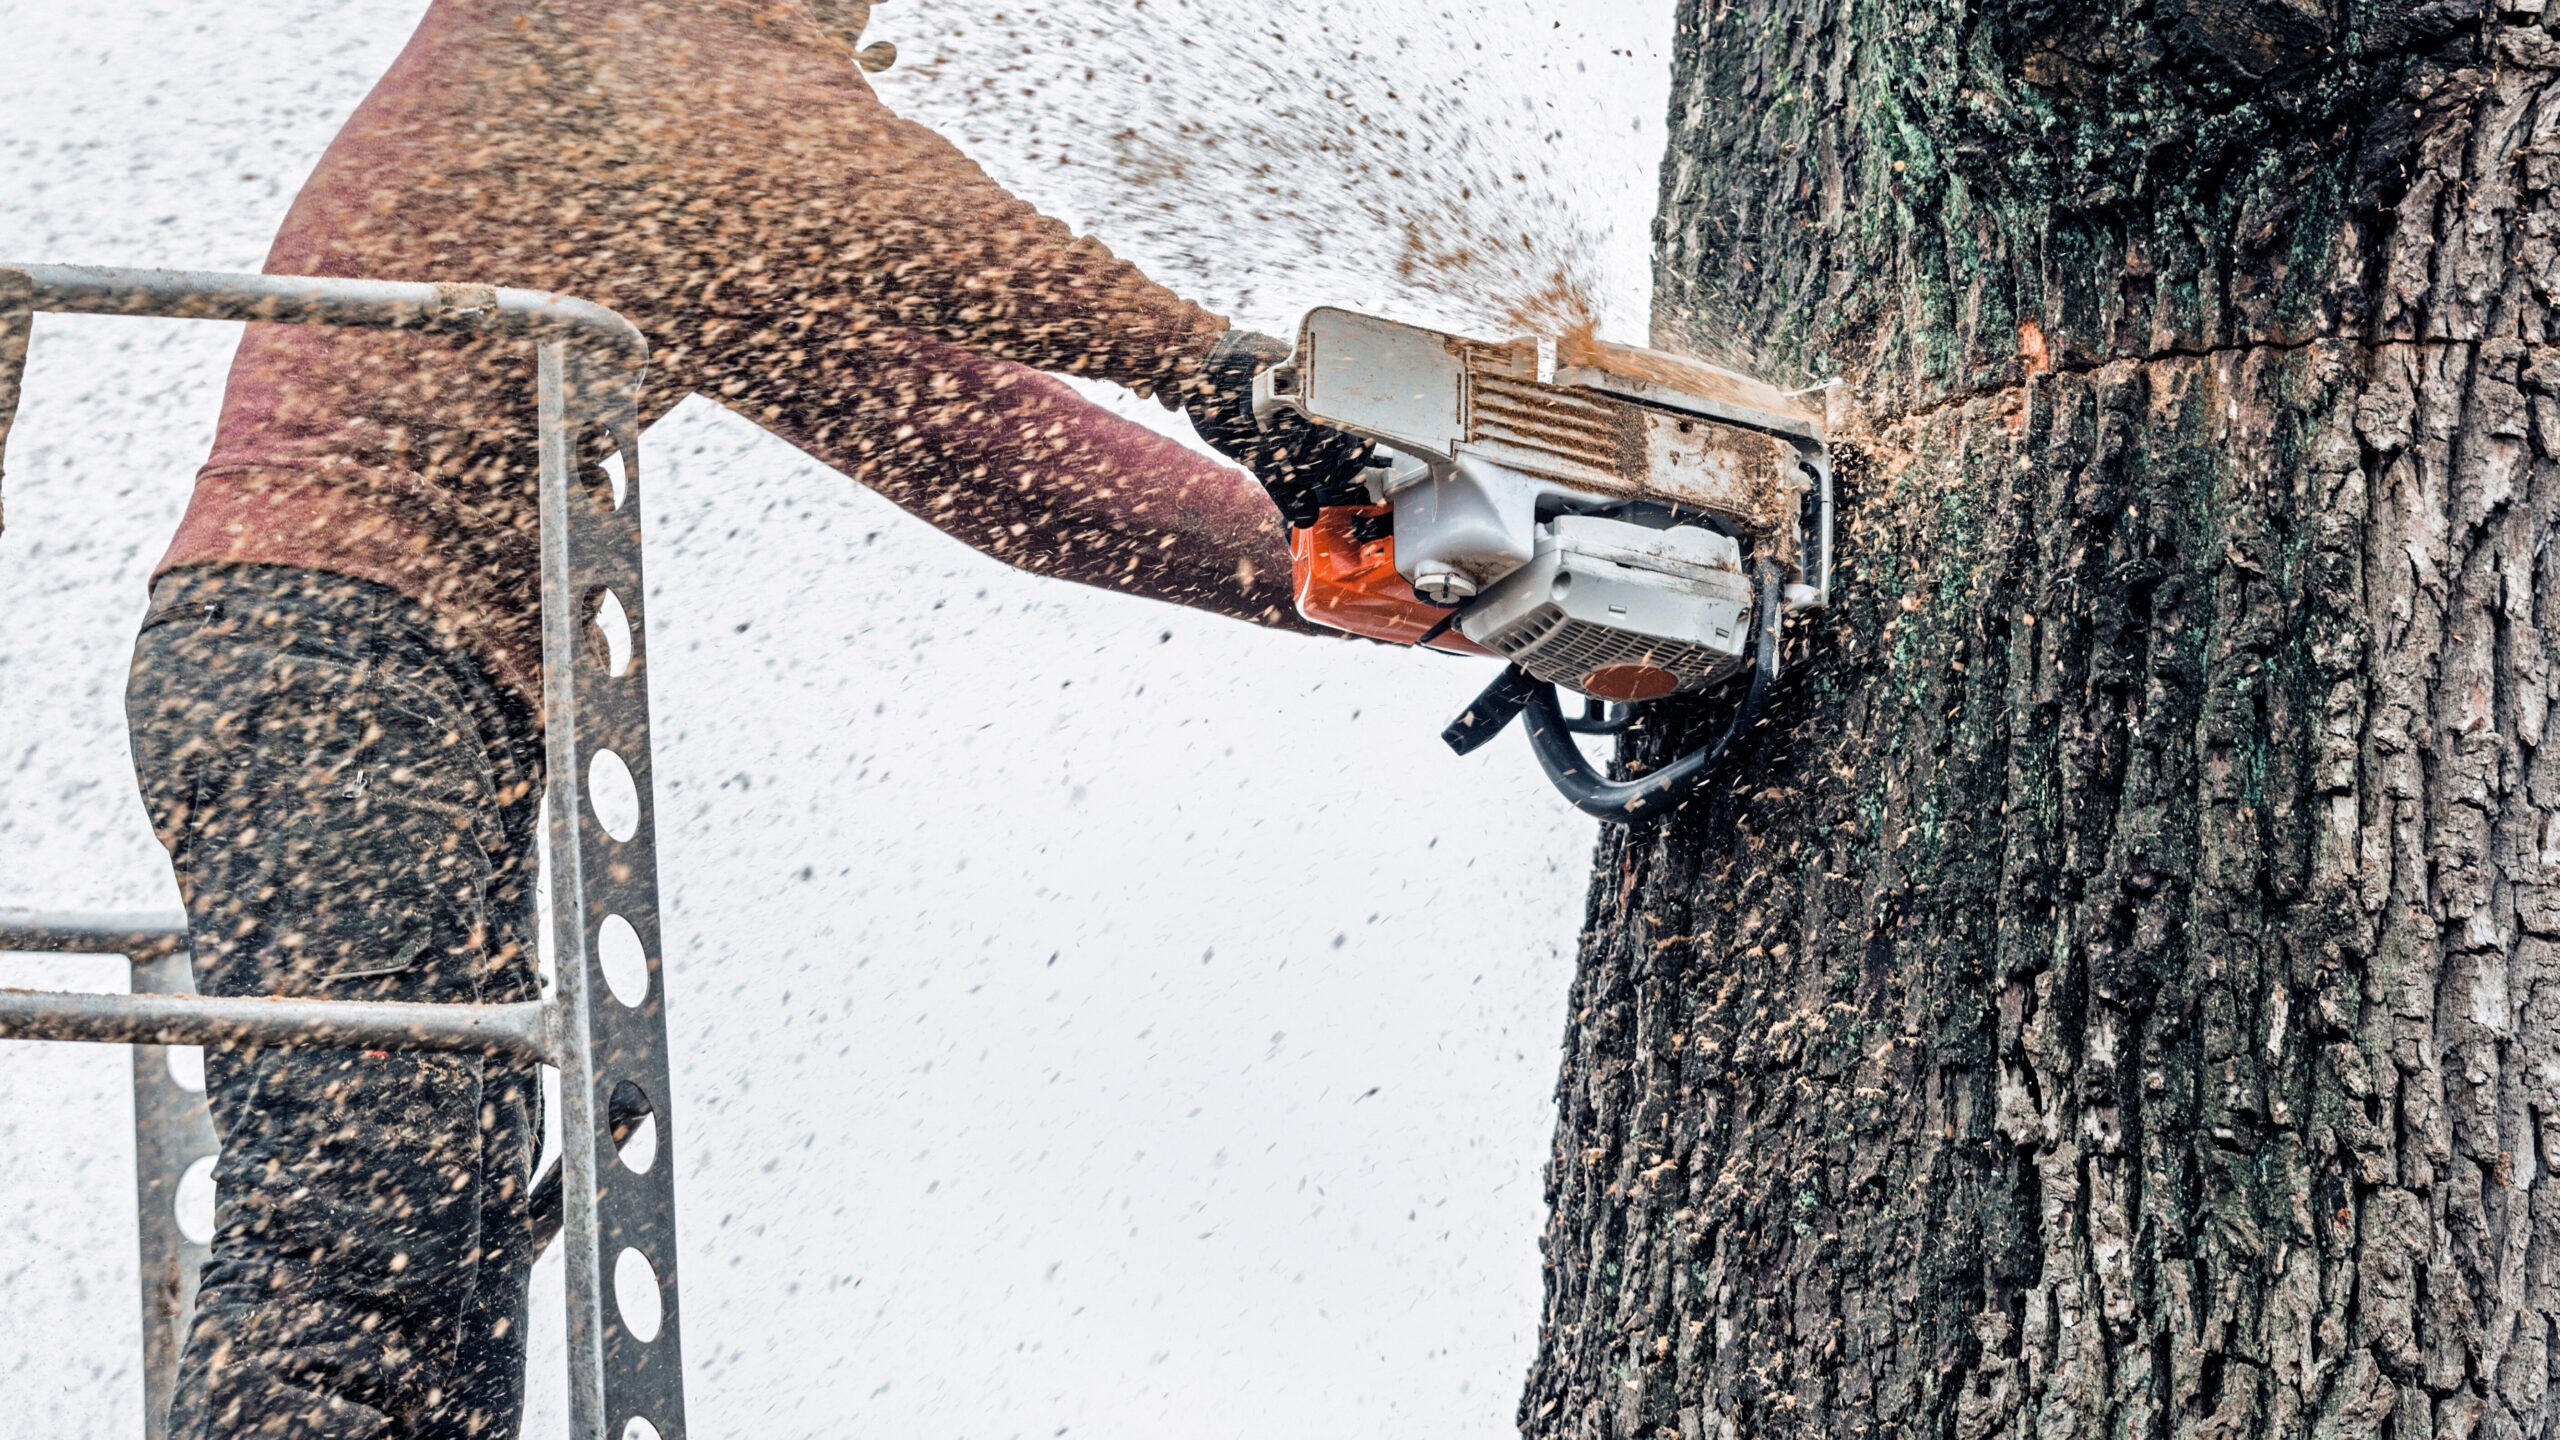 A man uses a chainsaw to cut through a thick tree trunk.